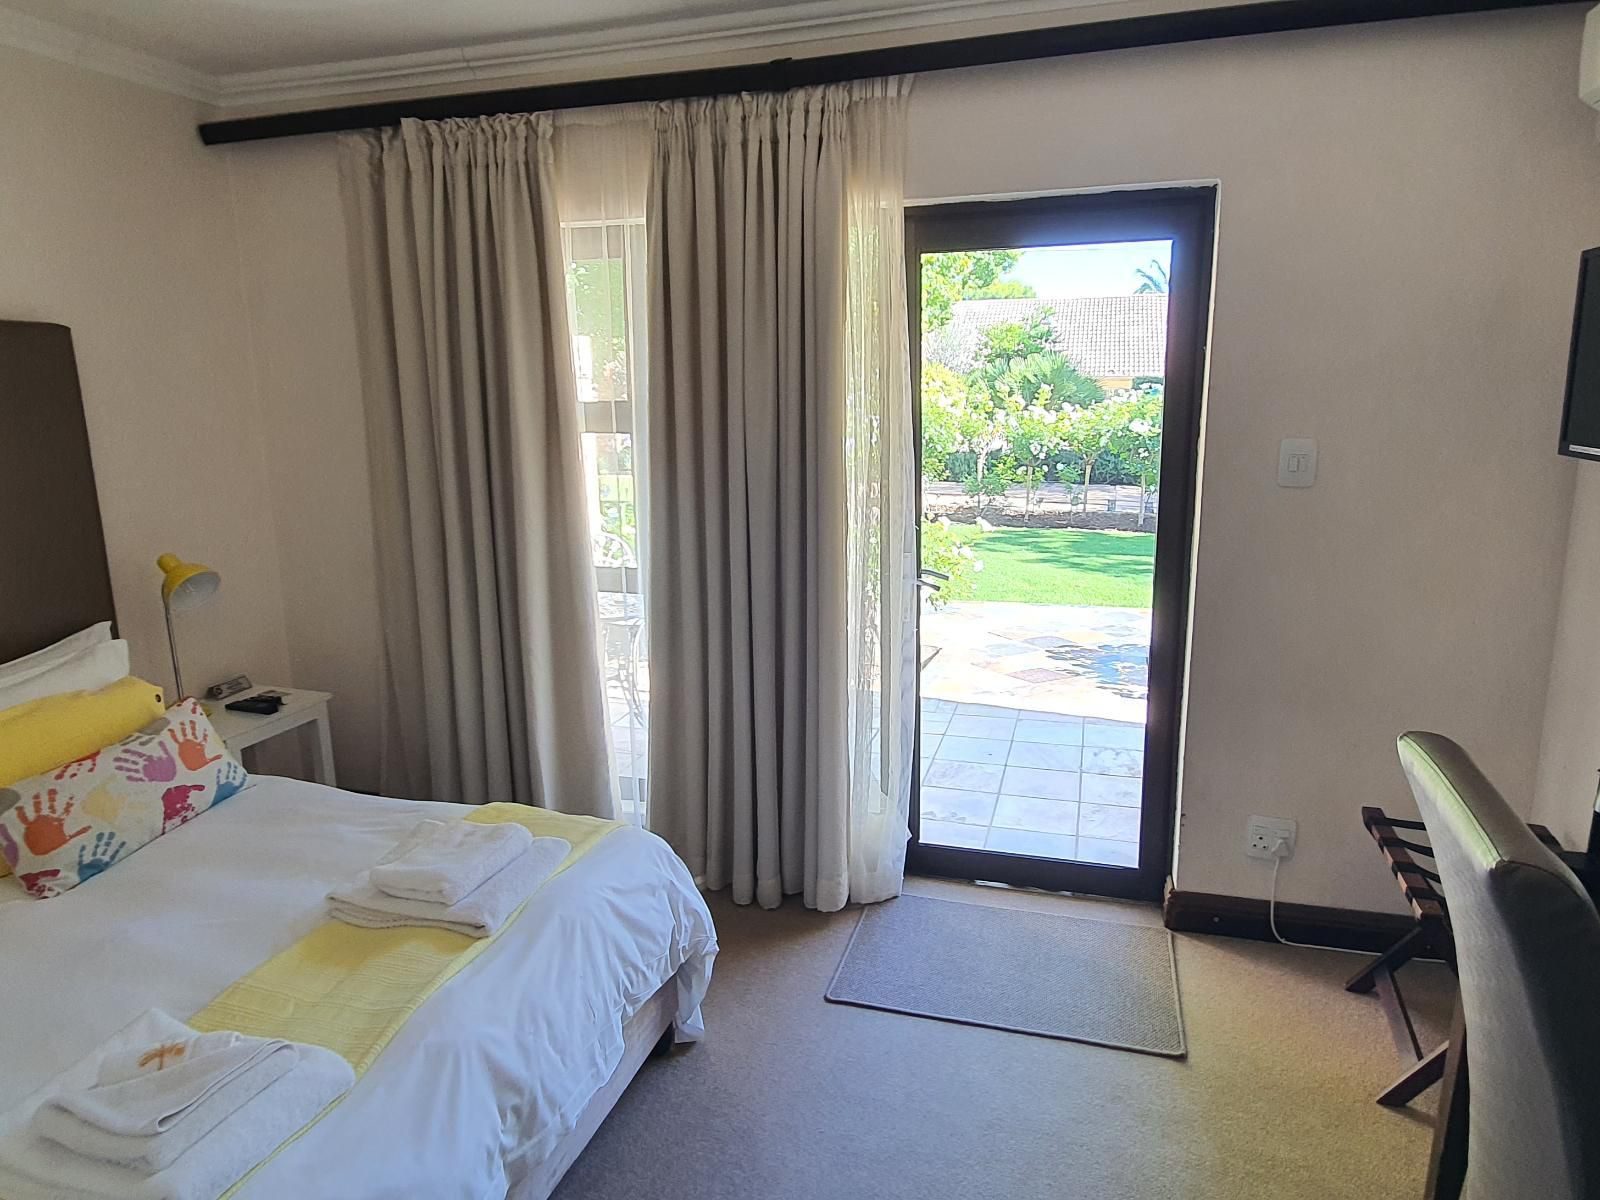 Acacia Lodge Fichardt Park Bloemfontein Free State South Africa Bedroom